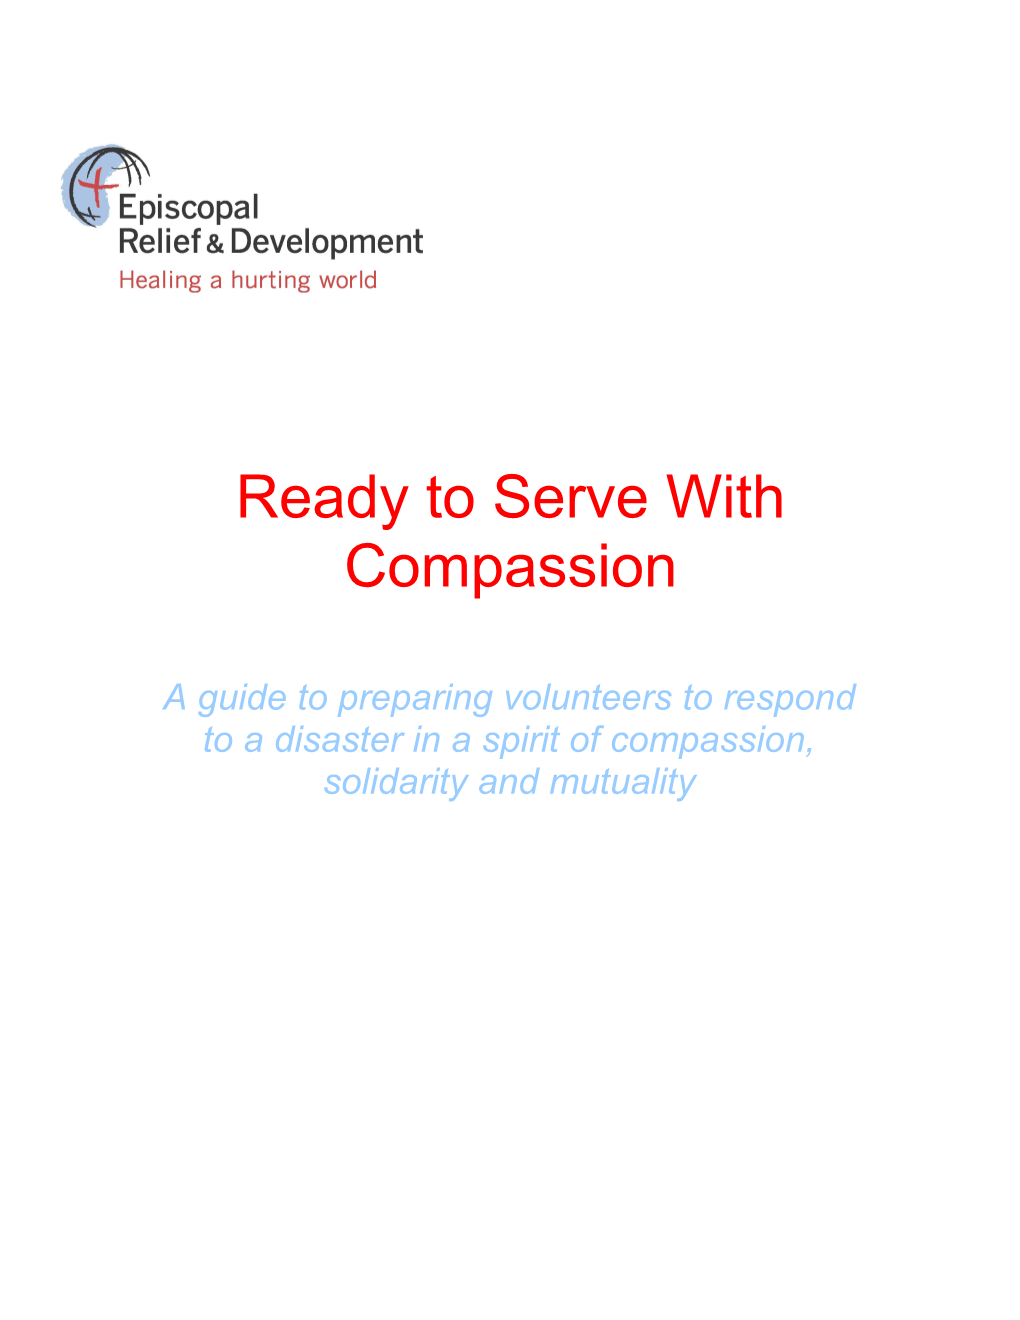 Ready to Serve with Compassion